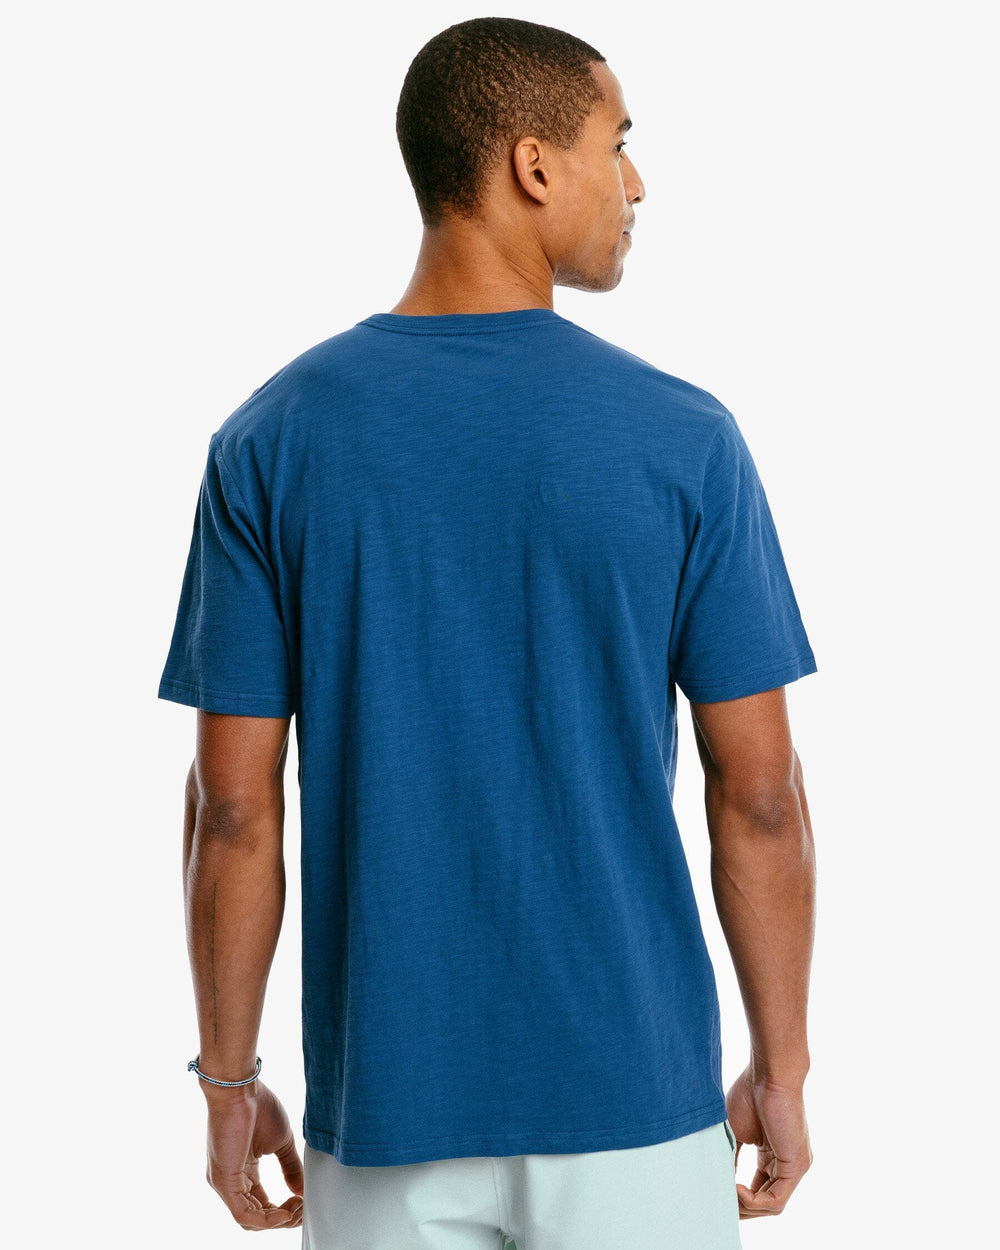 The back view of the Southern Tide Sun Farer Short Sleeve T-Shirt by Southern Tide - Atlantic Blue